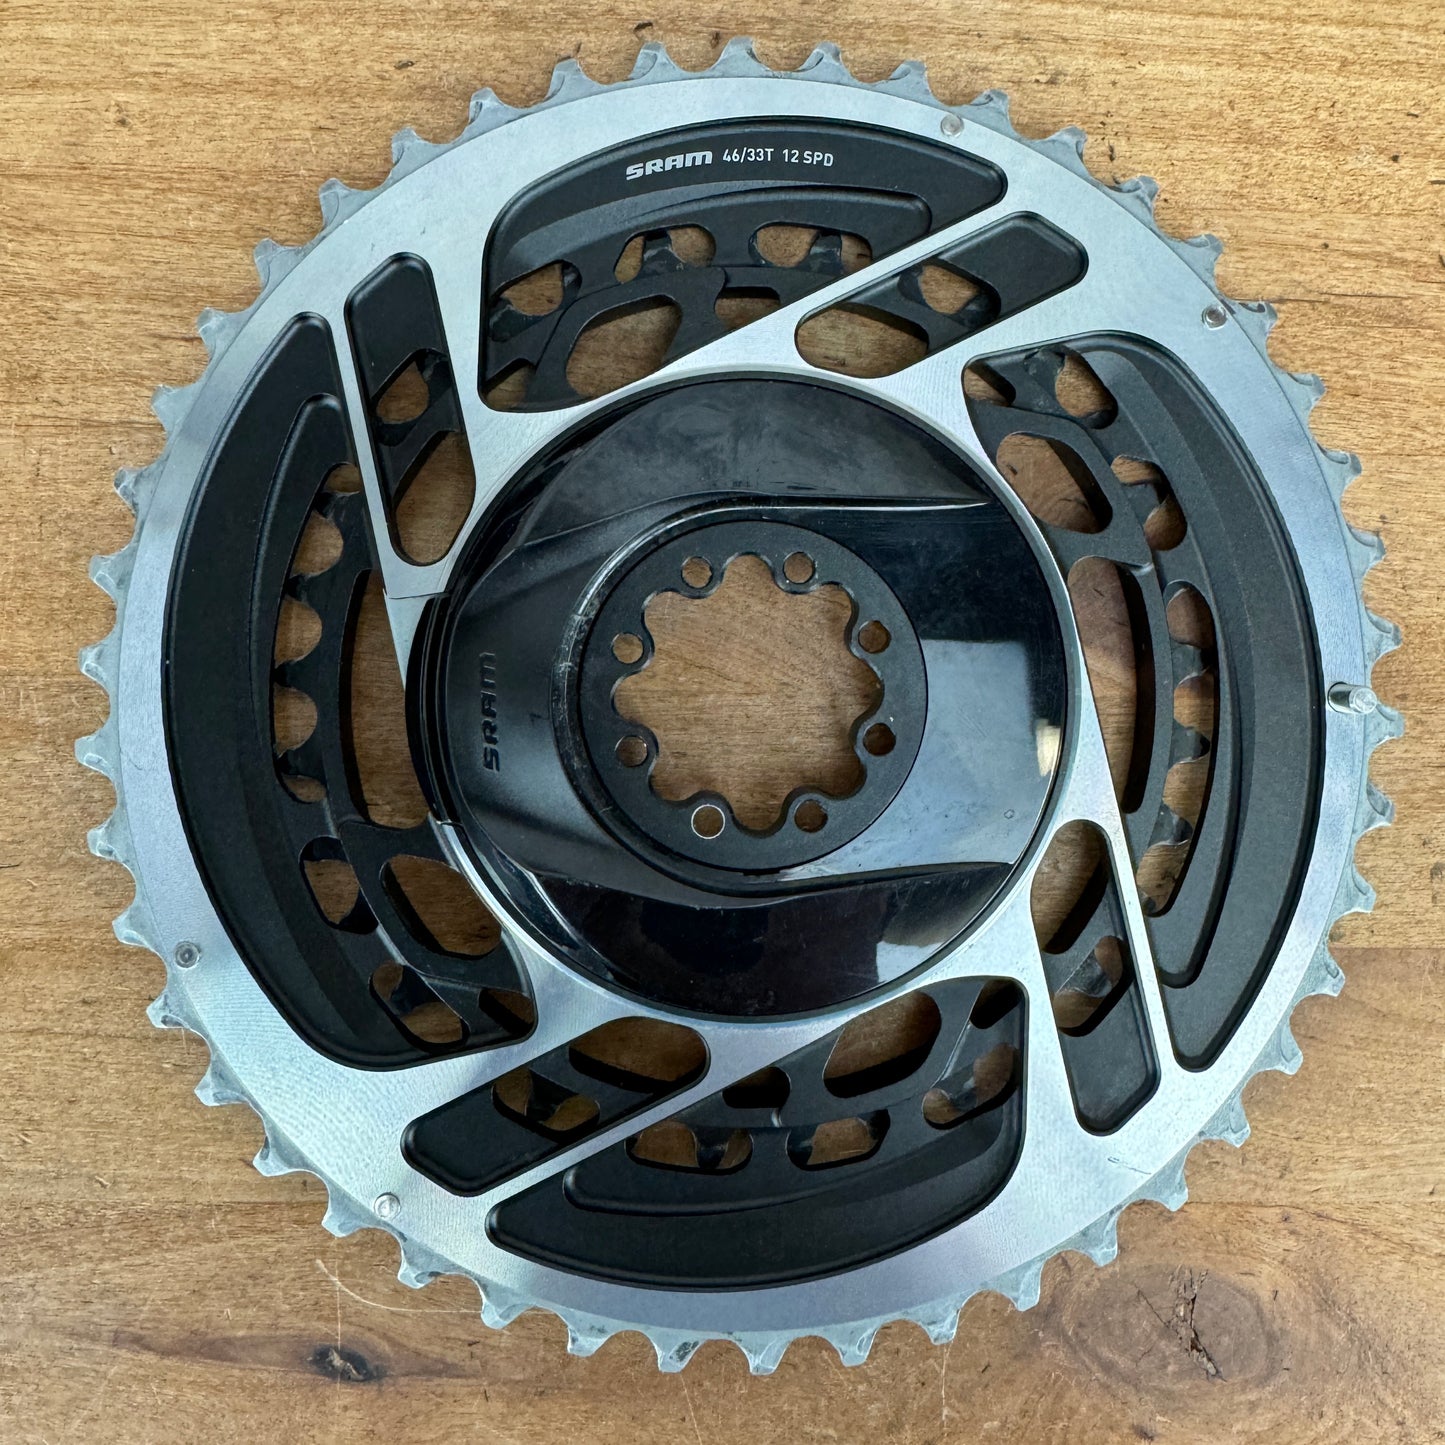 Low Mile! SRAM Red AXS 12-Speed 46/33t 8-Bolt Direct Mount Bike Chainrings 225g